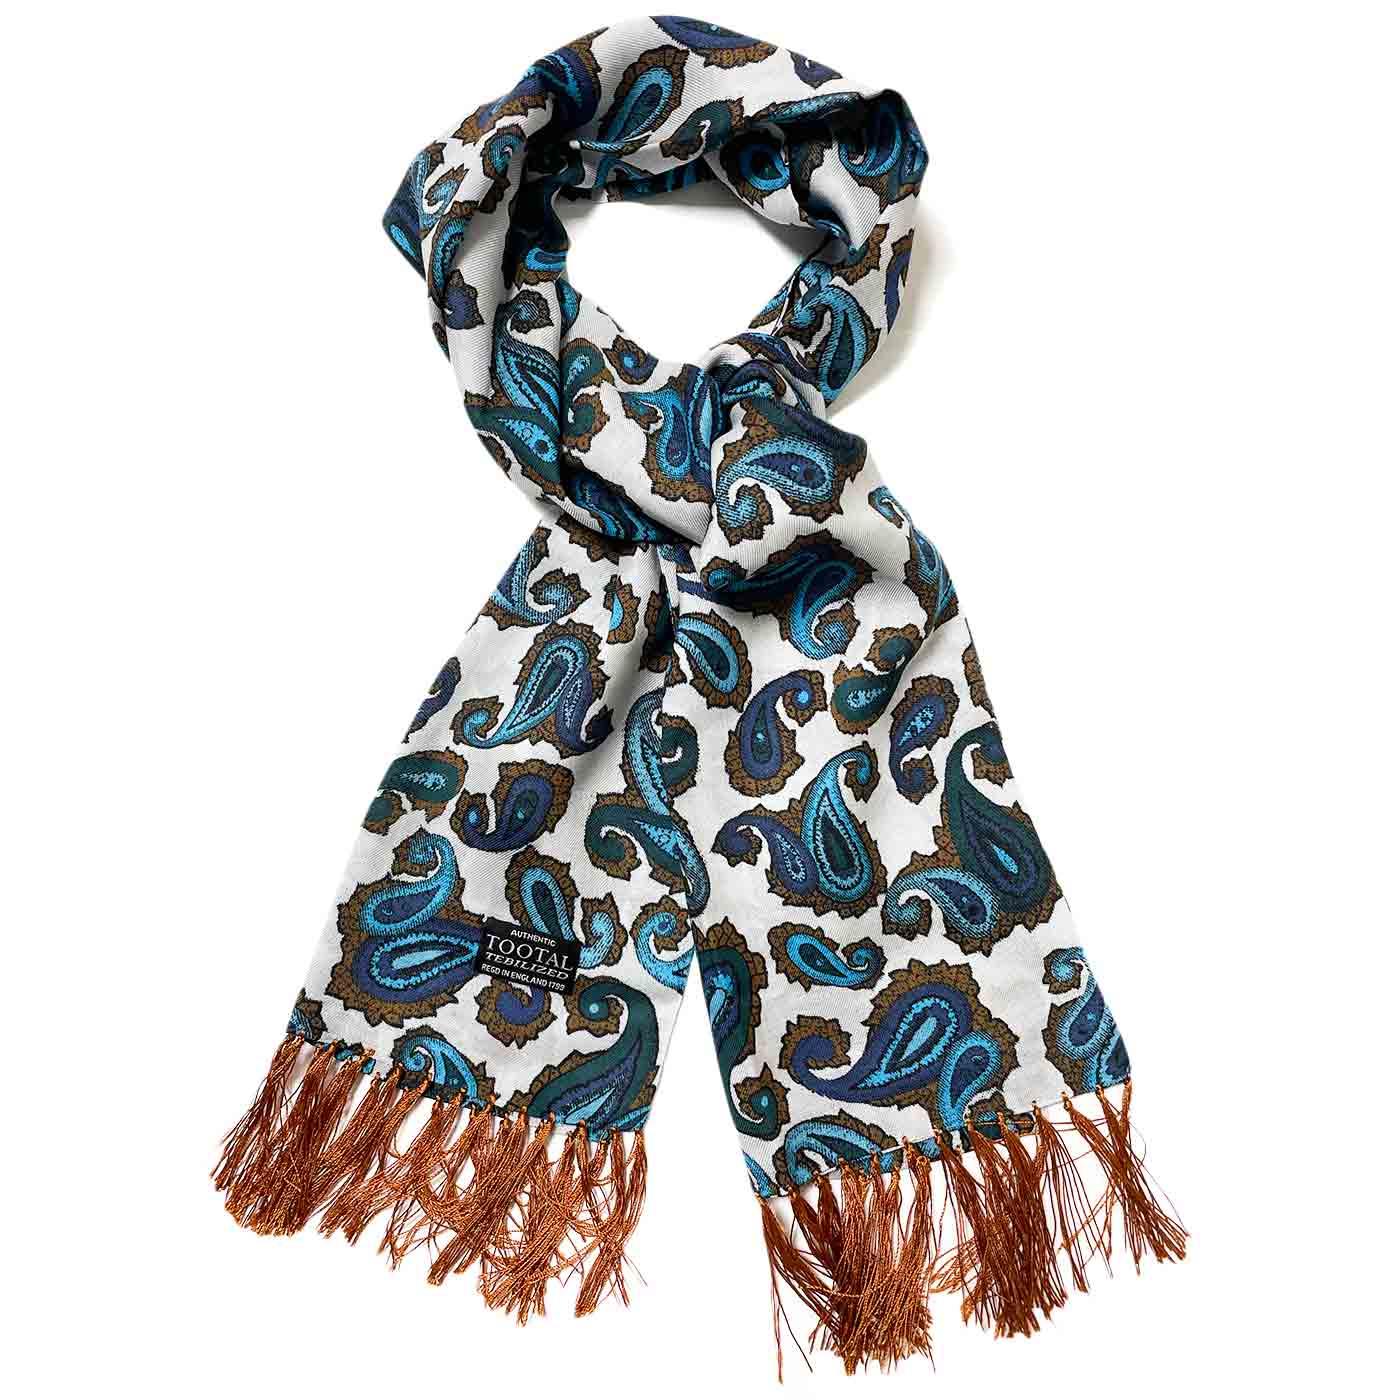 Tootal Double Paisley Fringed Mod Rayon Scarf Ocean Blue